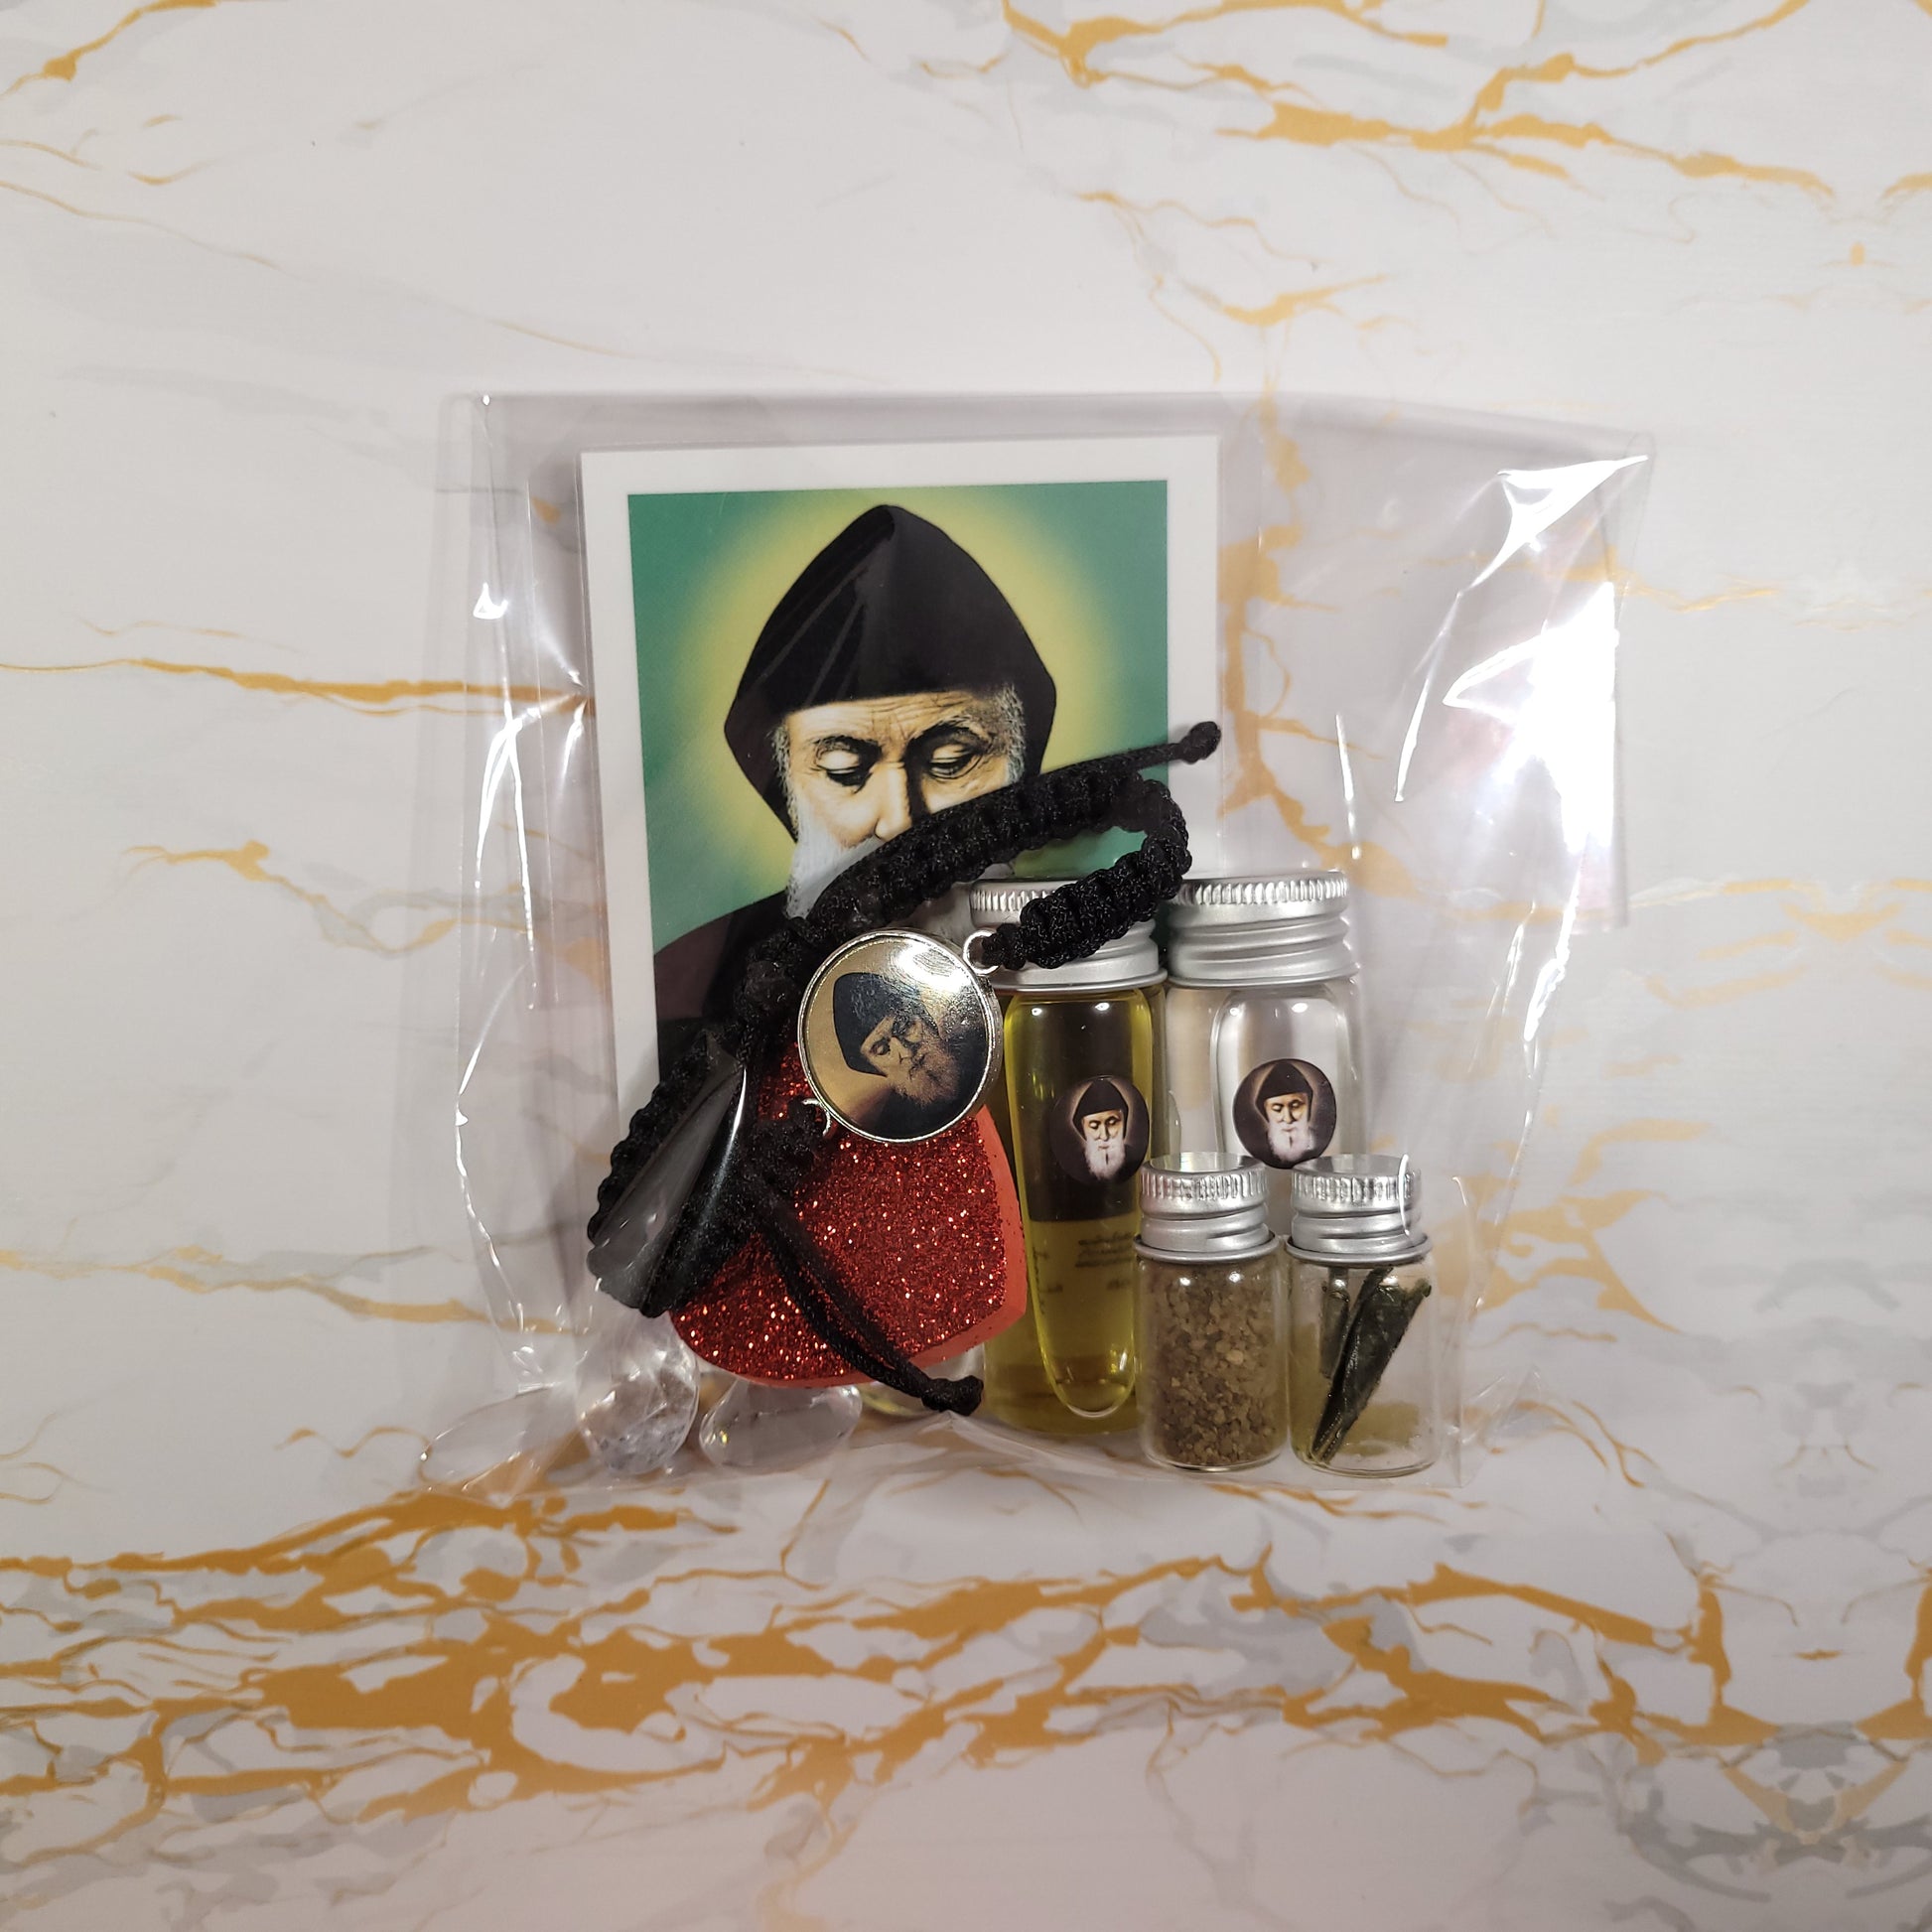 St Valentine's Day - Set of Saint Charbel with Eternal Roses - Our Lady of Gifts